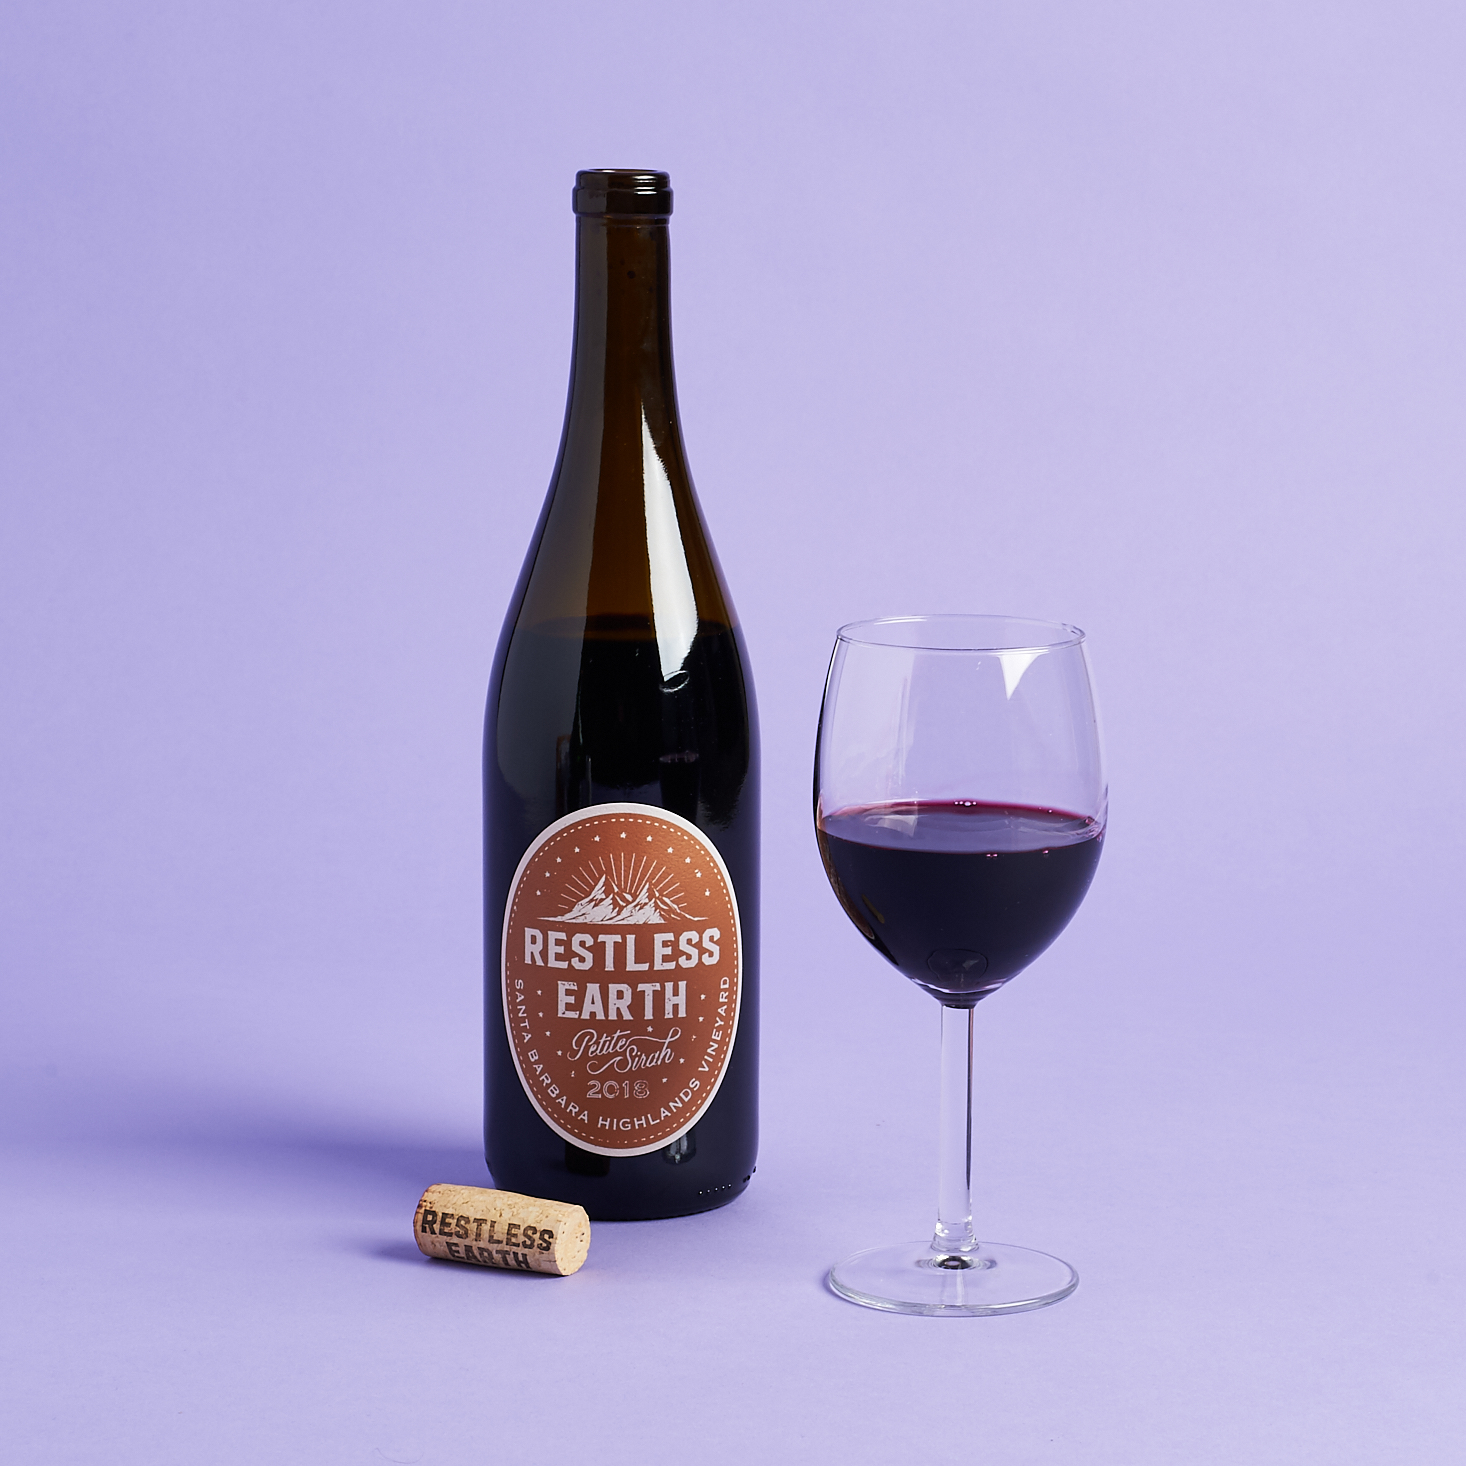 restless earth petite syrah bottle and glass